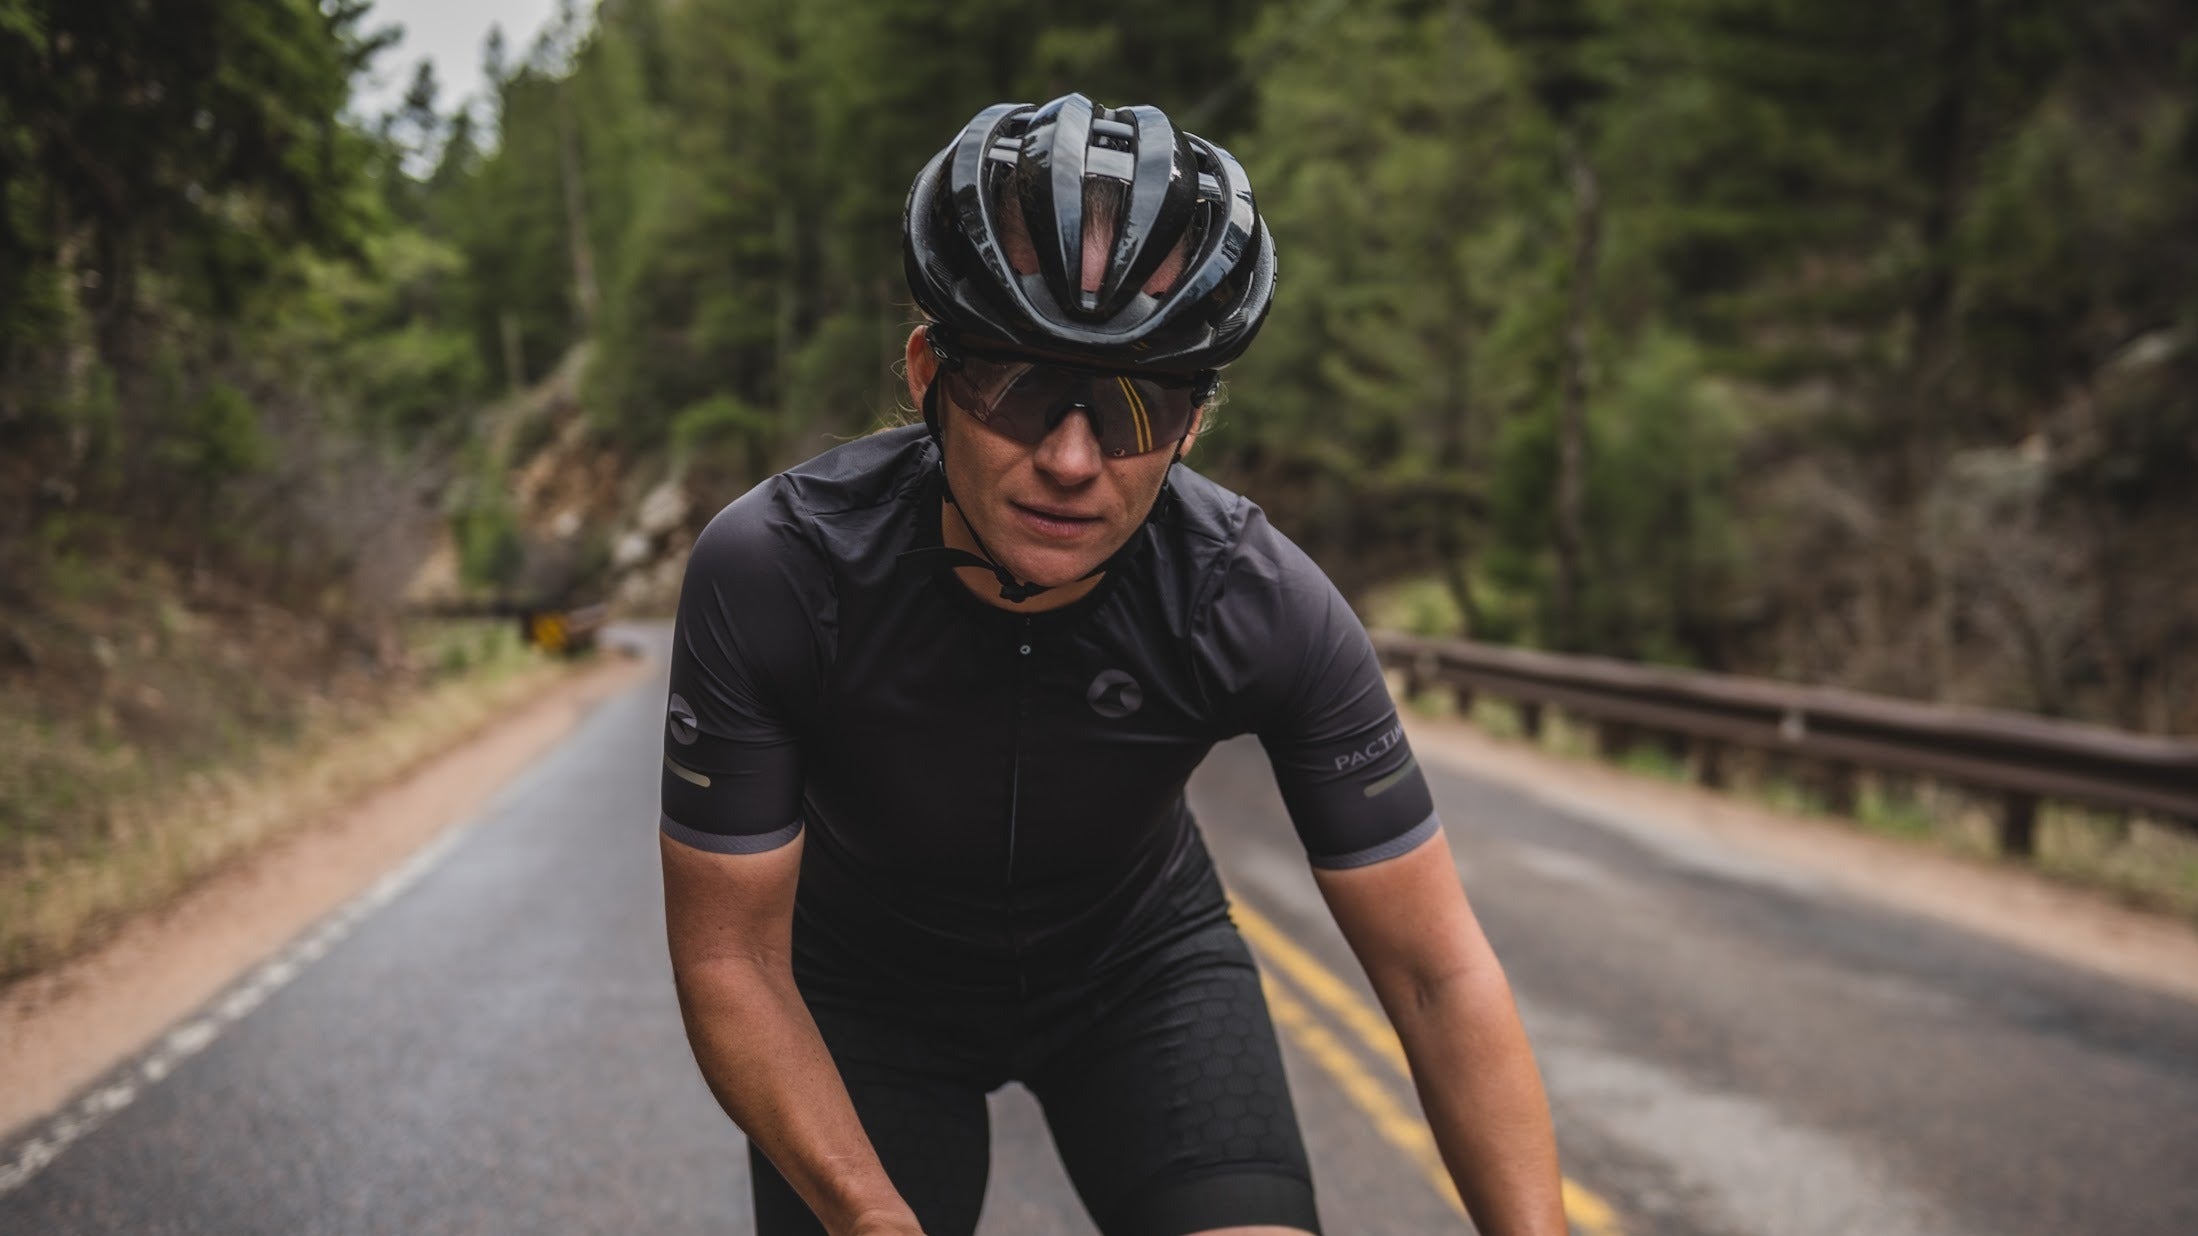 Women's Summer Cycling Clothing from Indy freelance